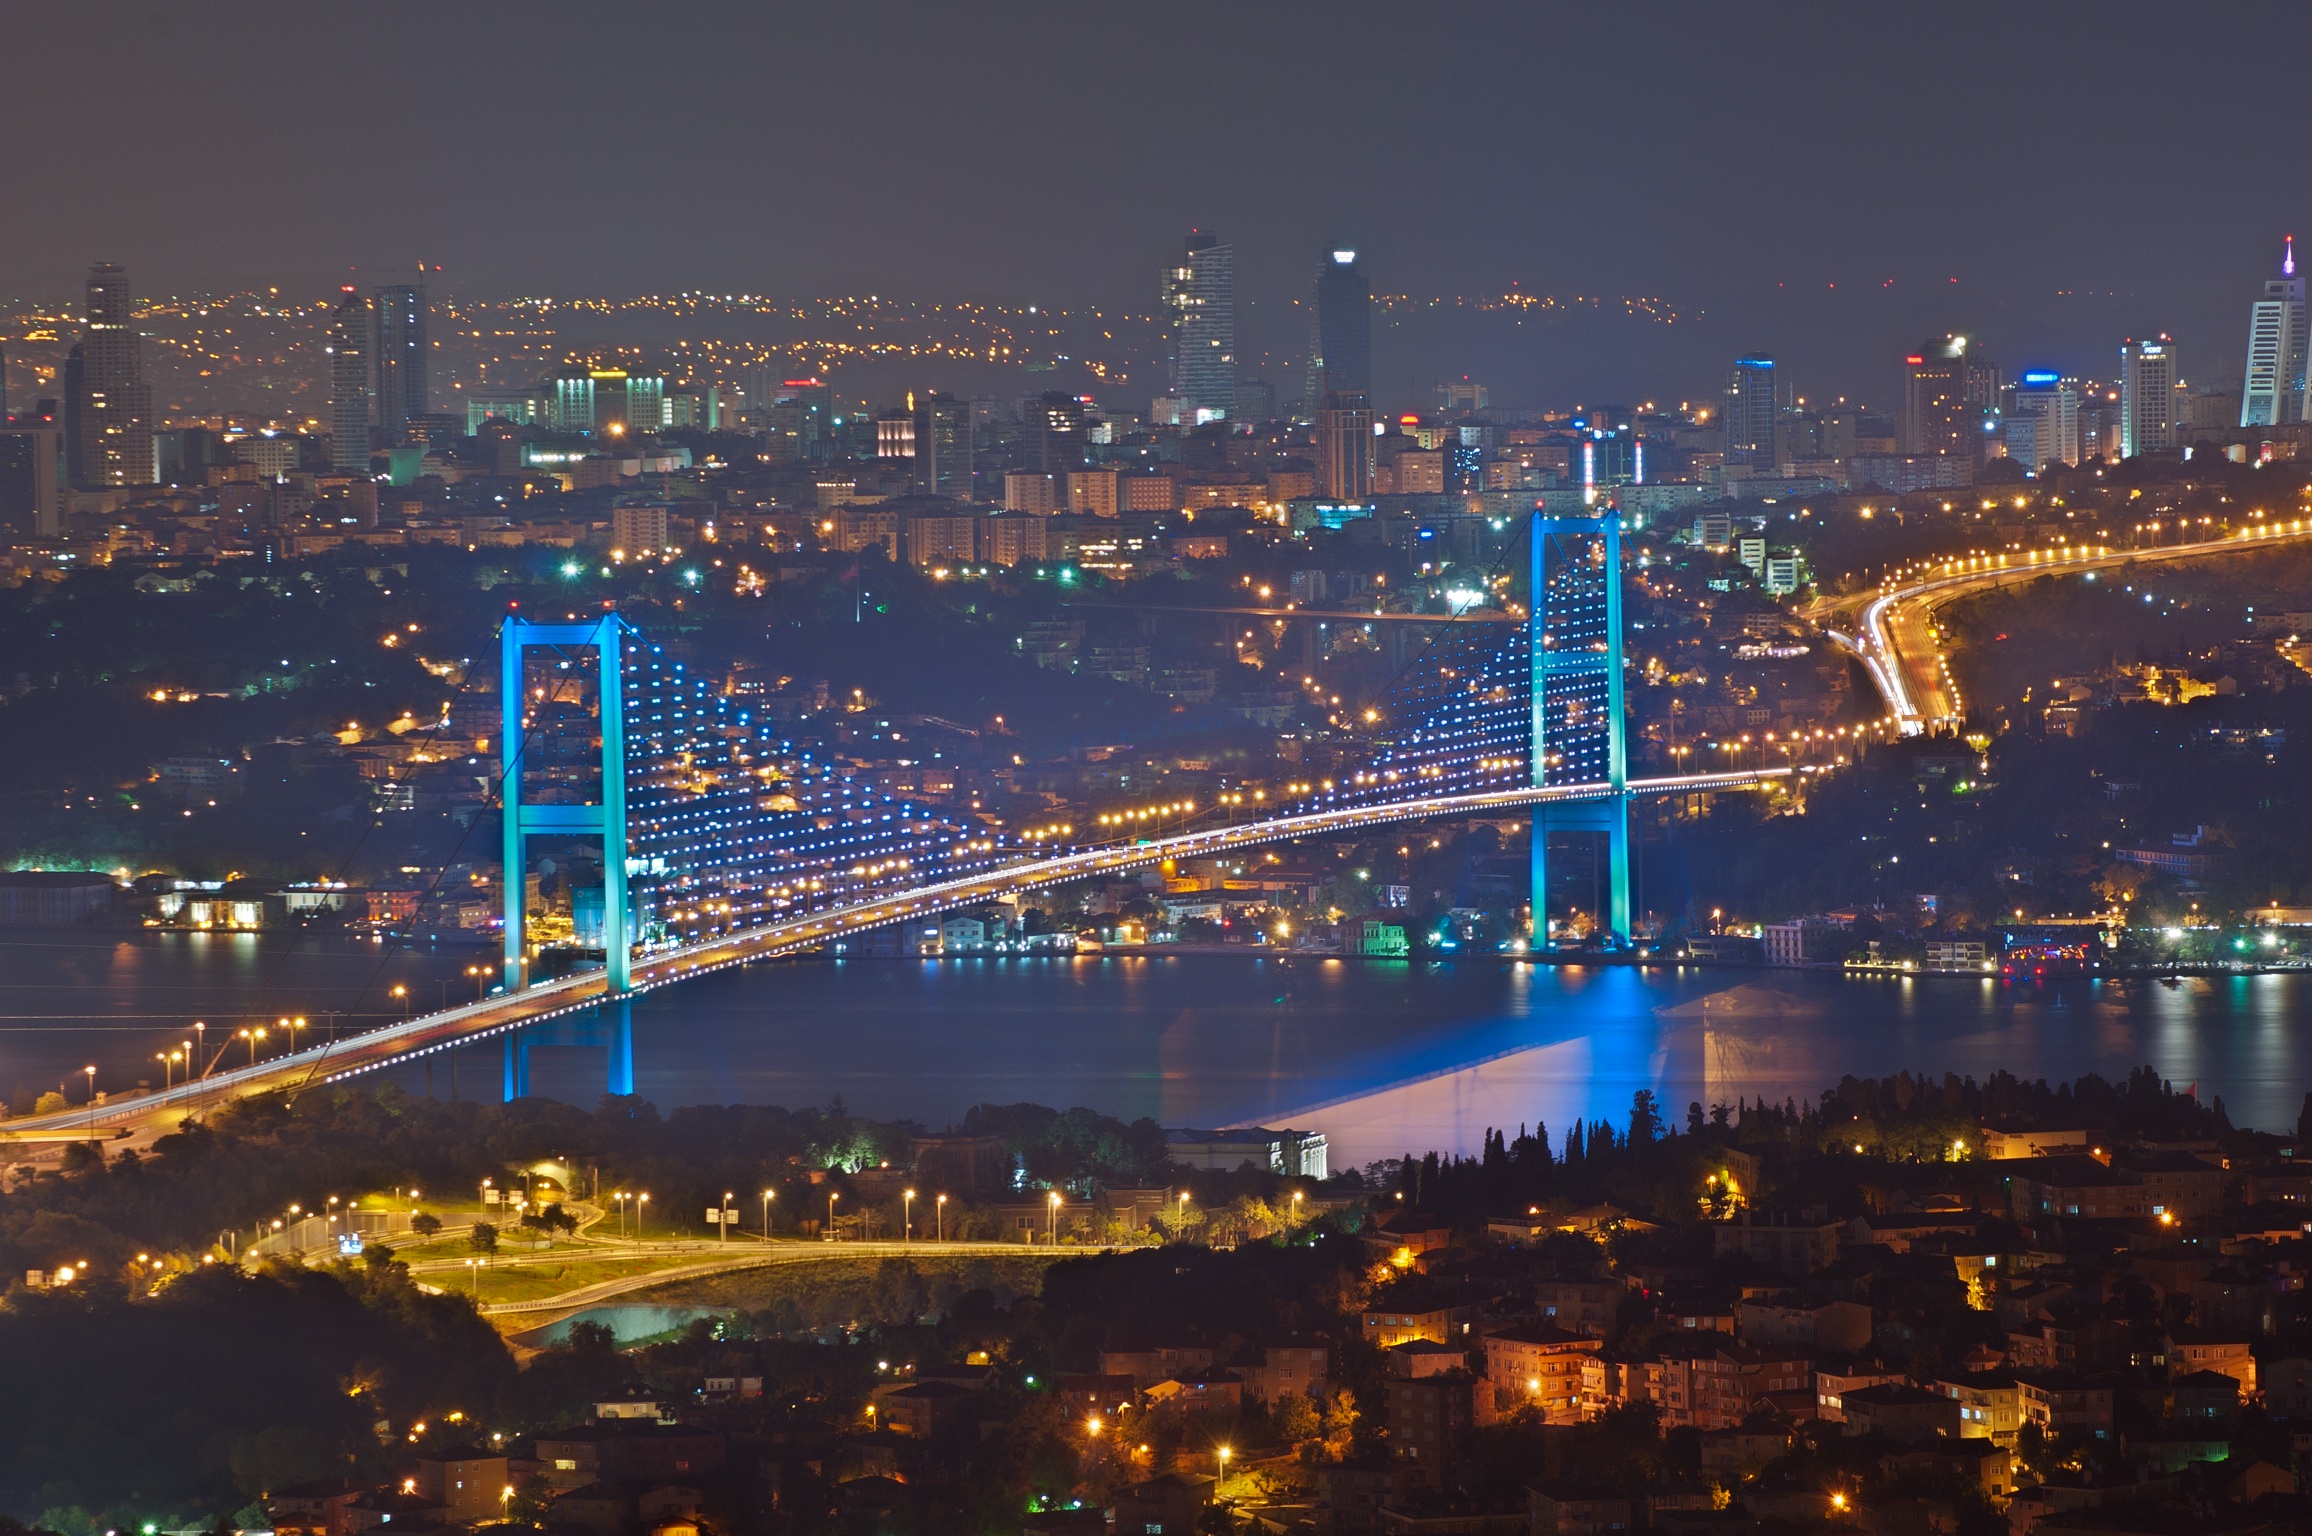 1973: Bridge Connecting Europe with Asia Built in Istanbul